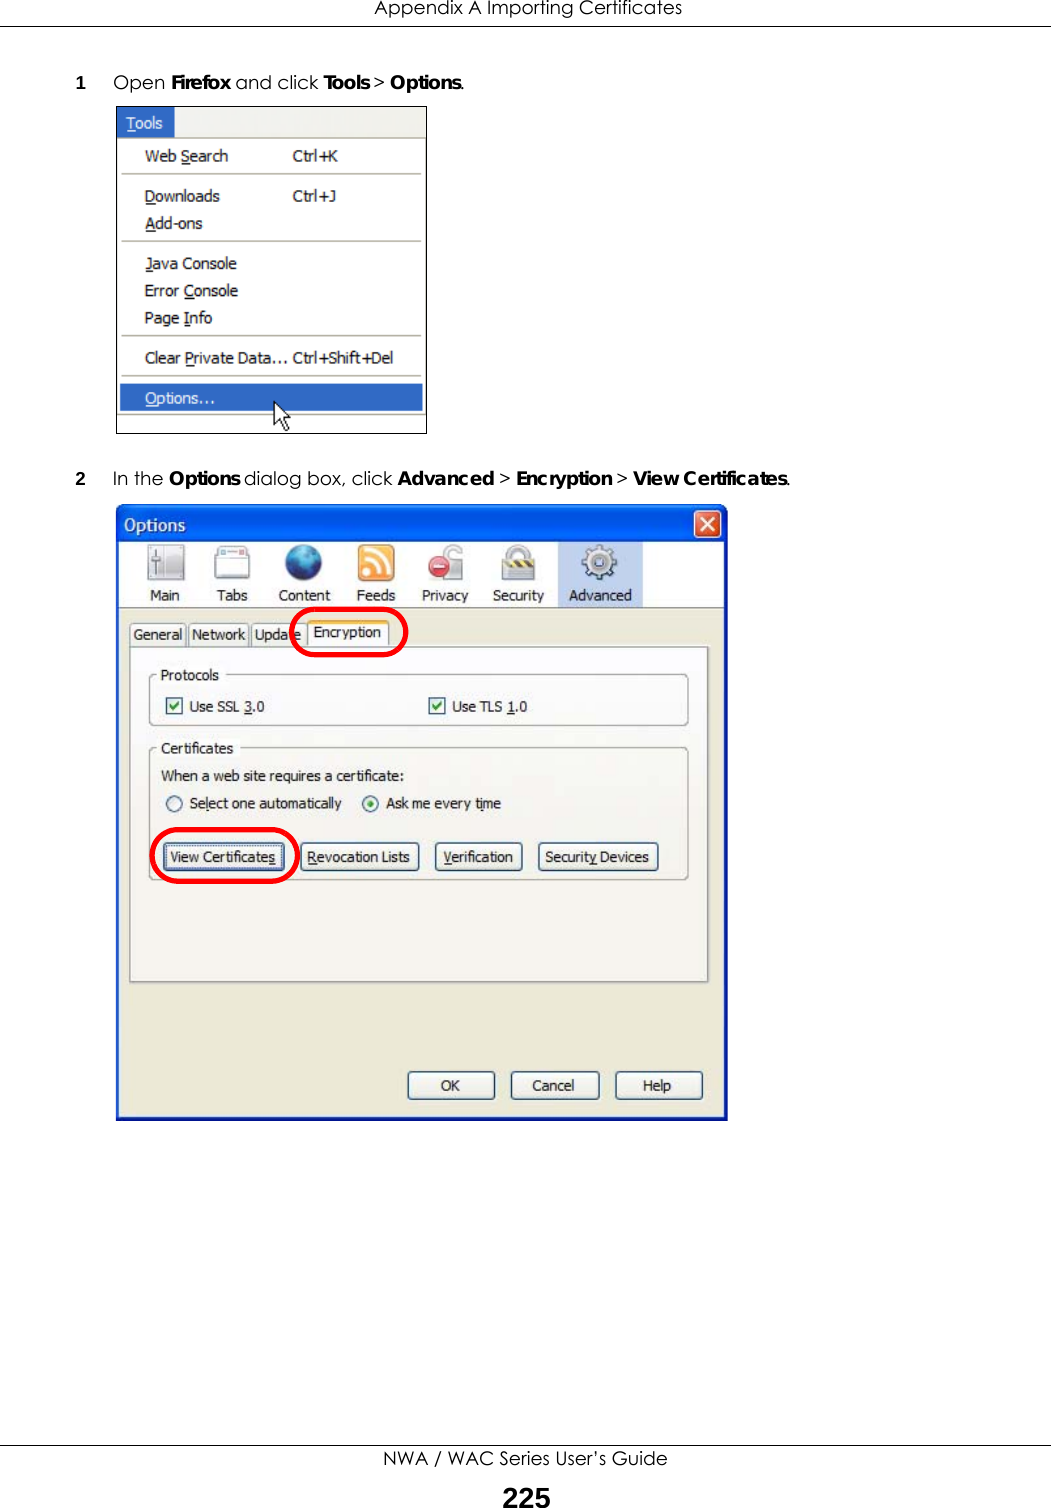  Appendix A Importing CertificatesNWA / WAC Series User’s Guide2251Open Firefox and click Tools &gt; Options.2In the Options dialog box, click Advanced &gt; Encryption &gt; View Certificates.